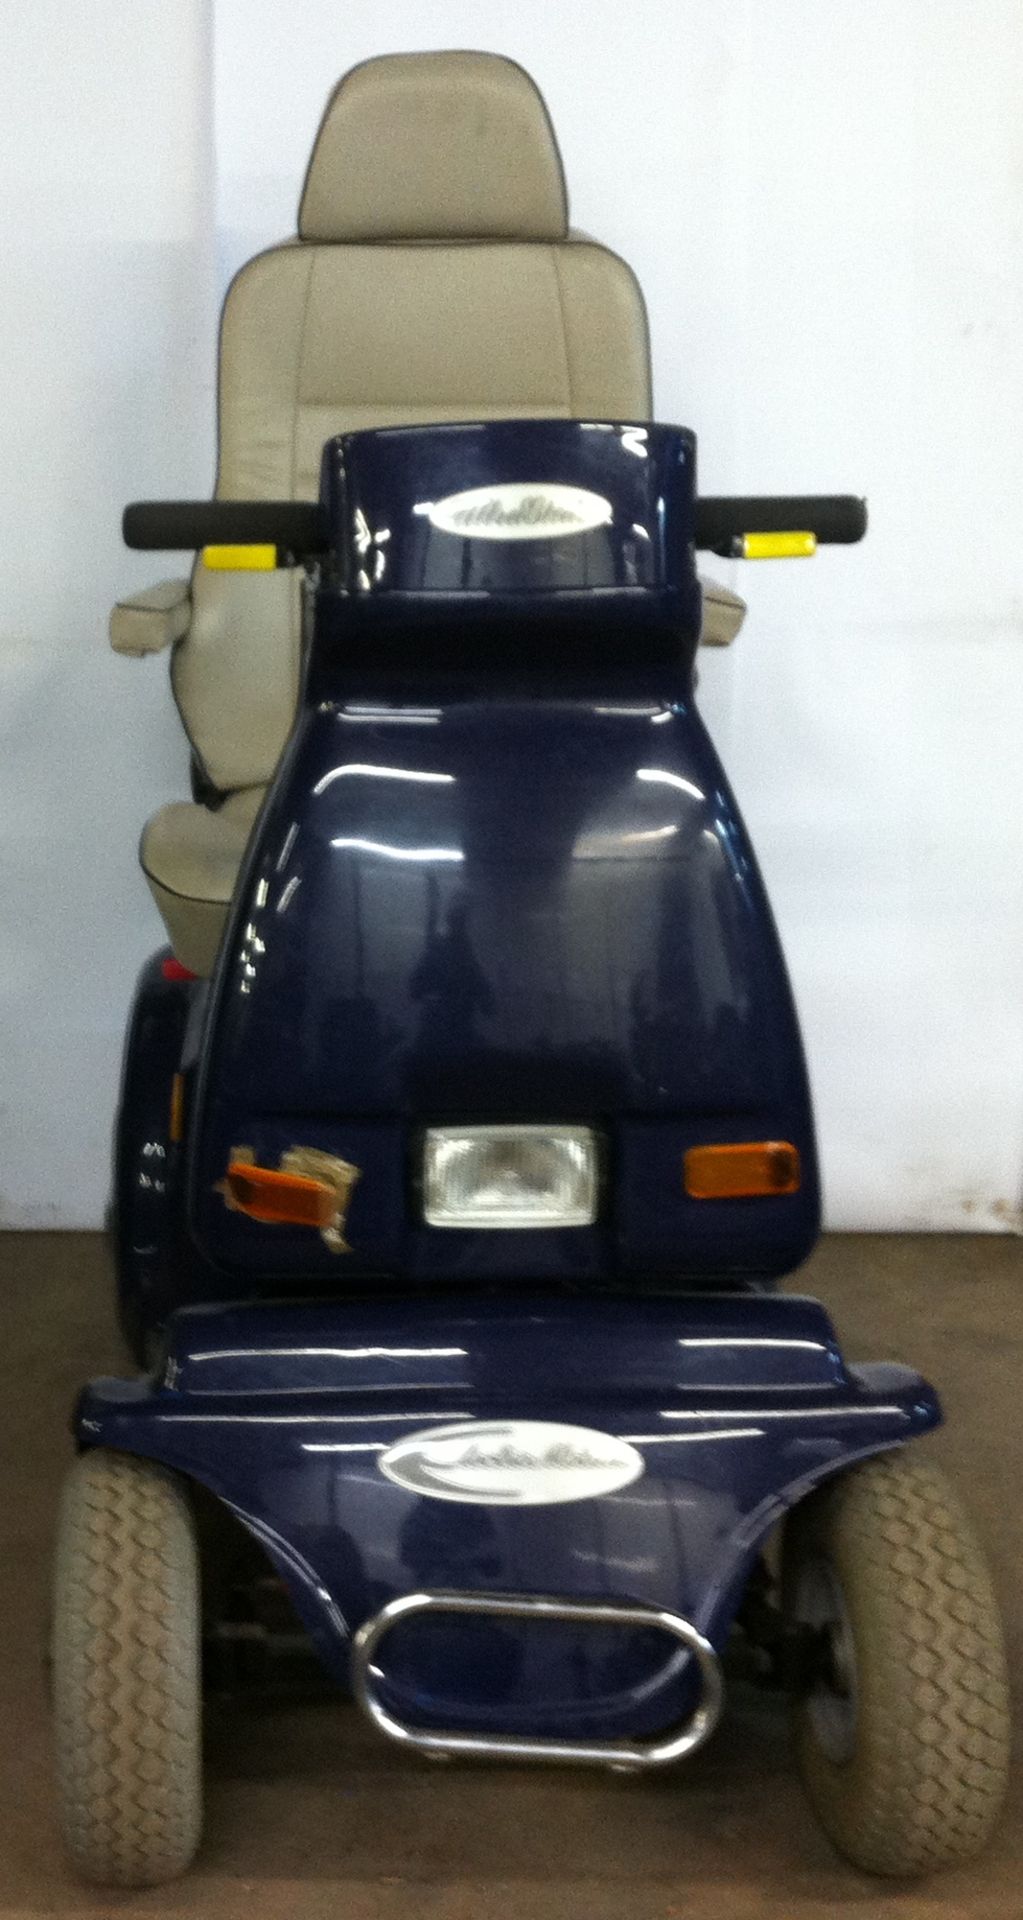 Electra Motion twin motor mobility scooter